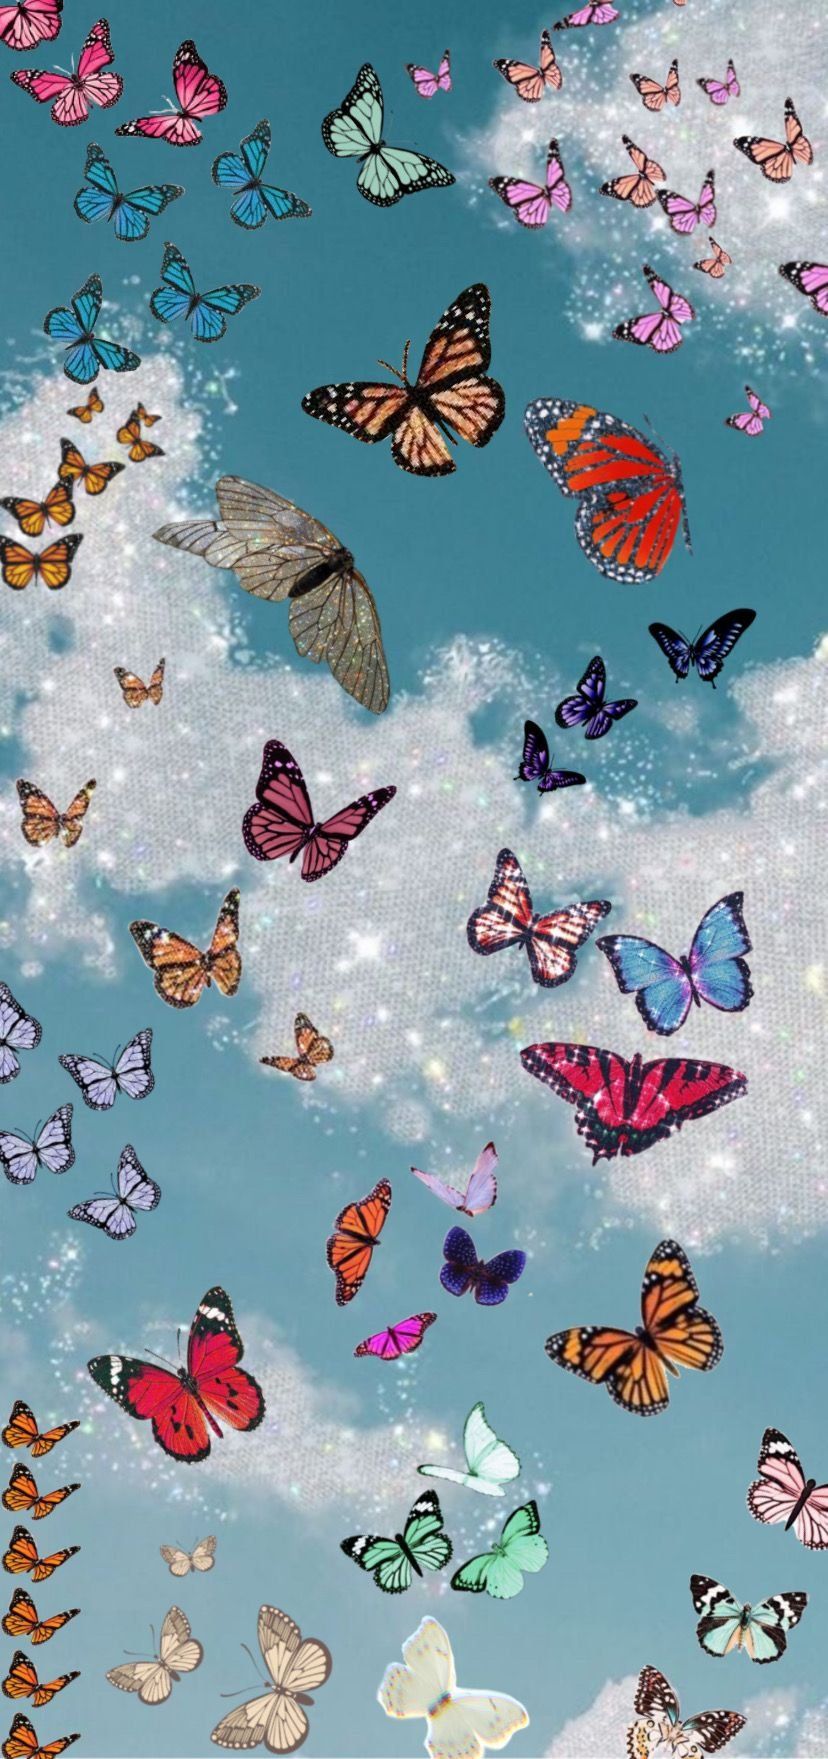 Colorful Butterflies Aesthetic Wallpaper Download